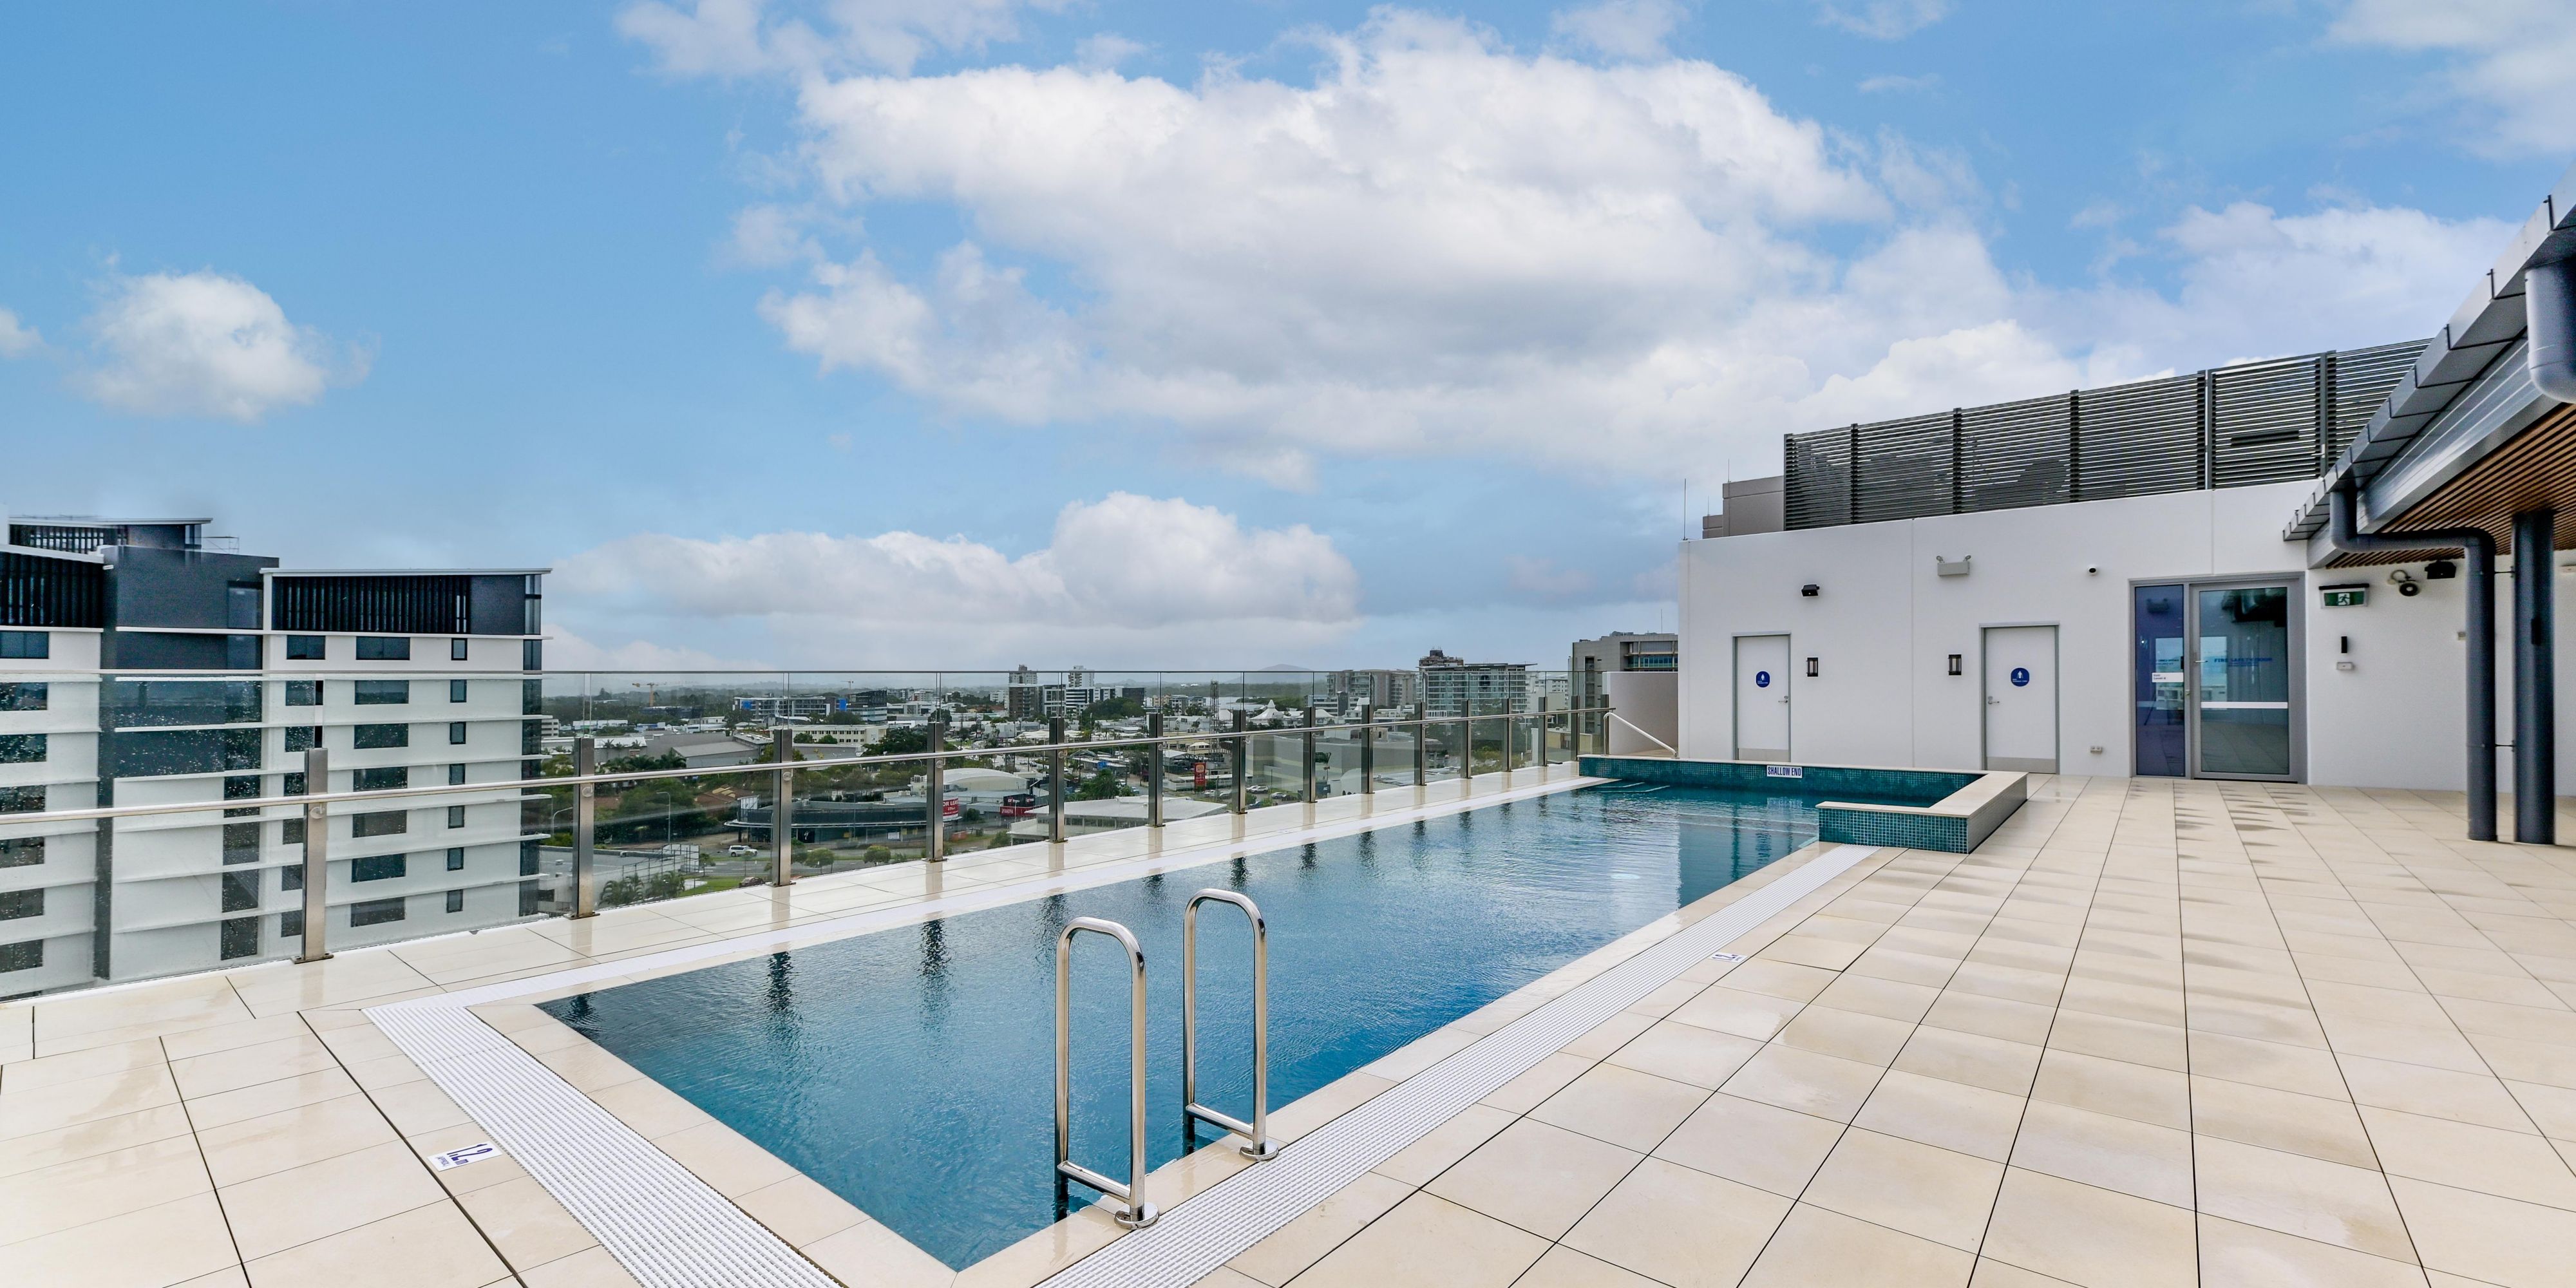 The rooftop pool is located on level 8, offering scenic views of the surrounding area. A great spot to enjoy the views, as well as swim while soaking in the surroundings. Guests can also spend some time relaxing by the pool on the multi-purpose deck.